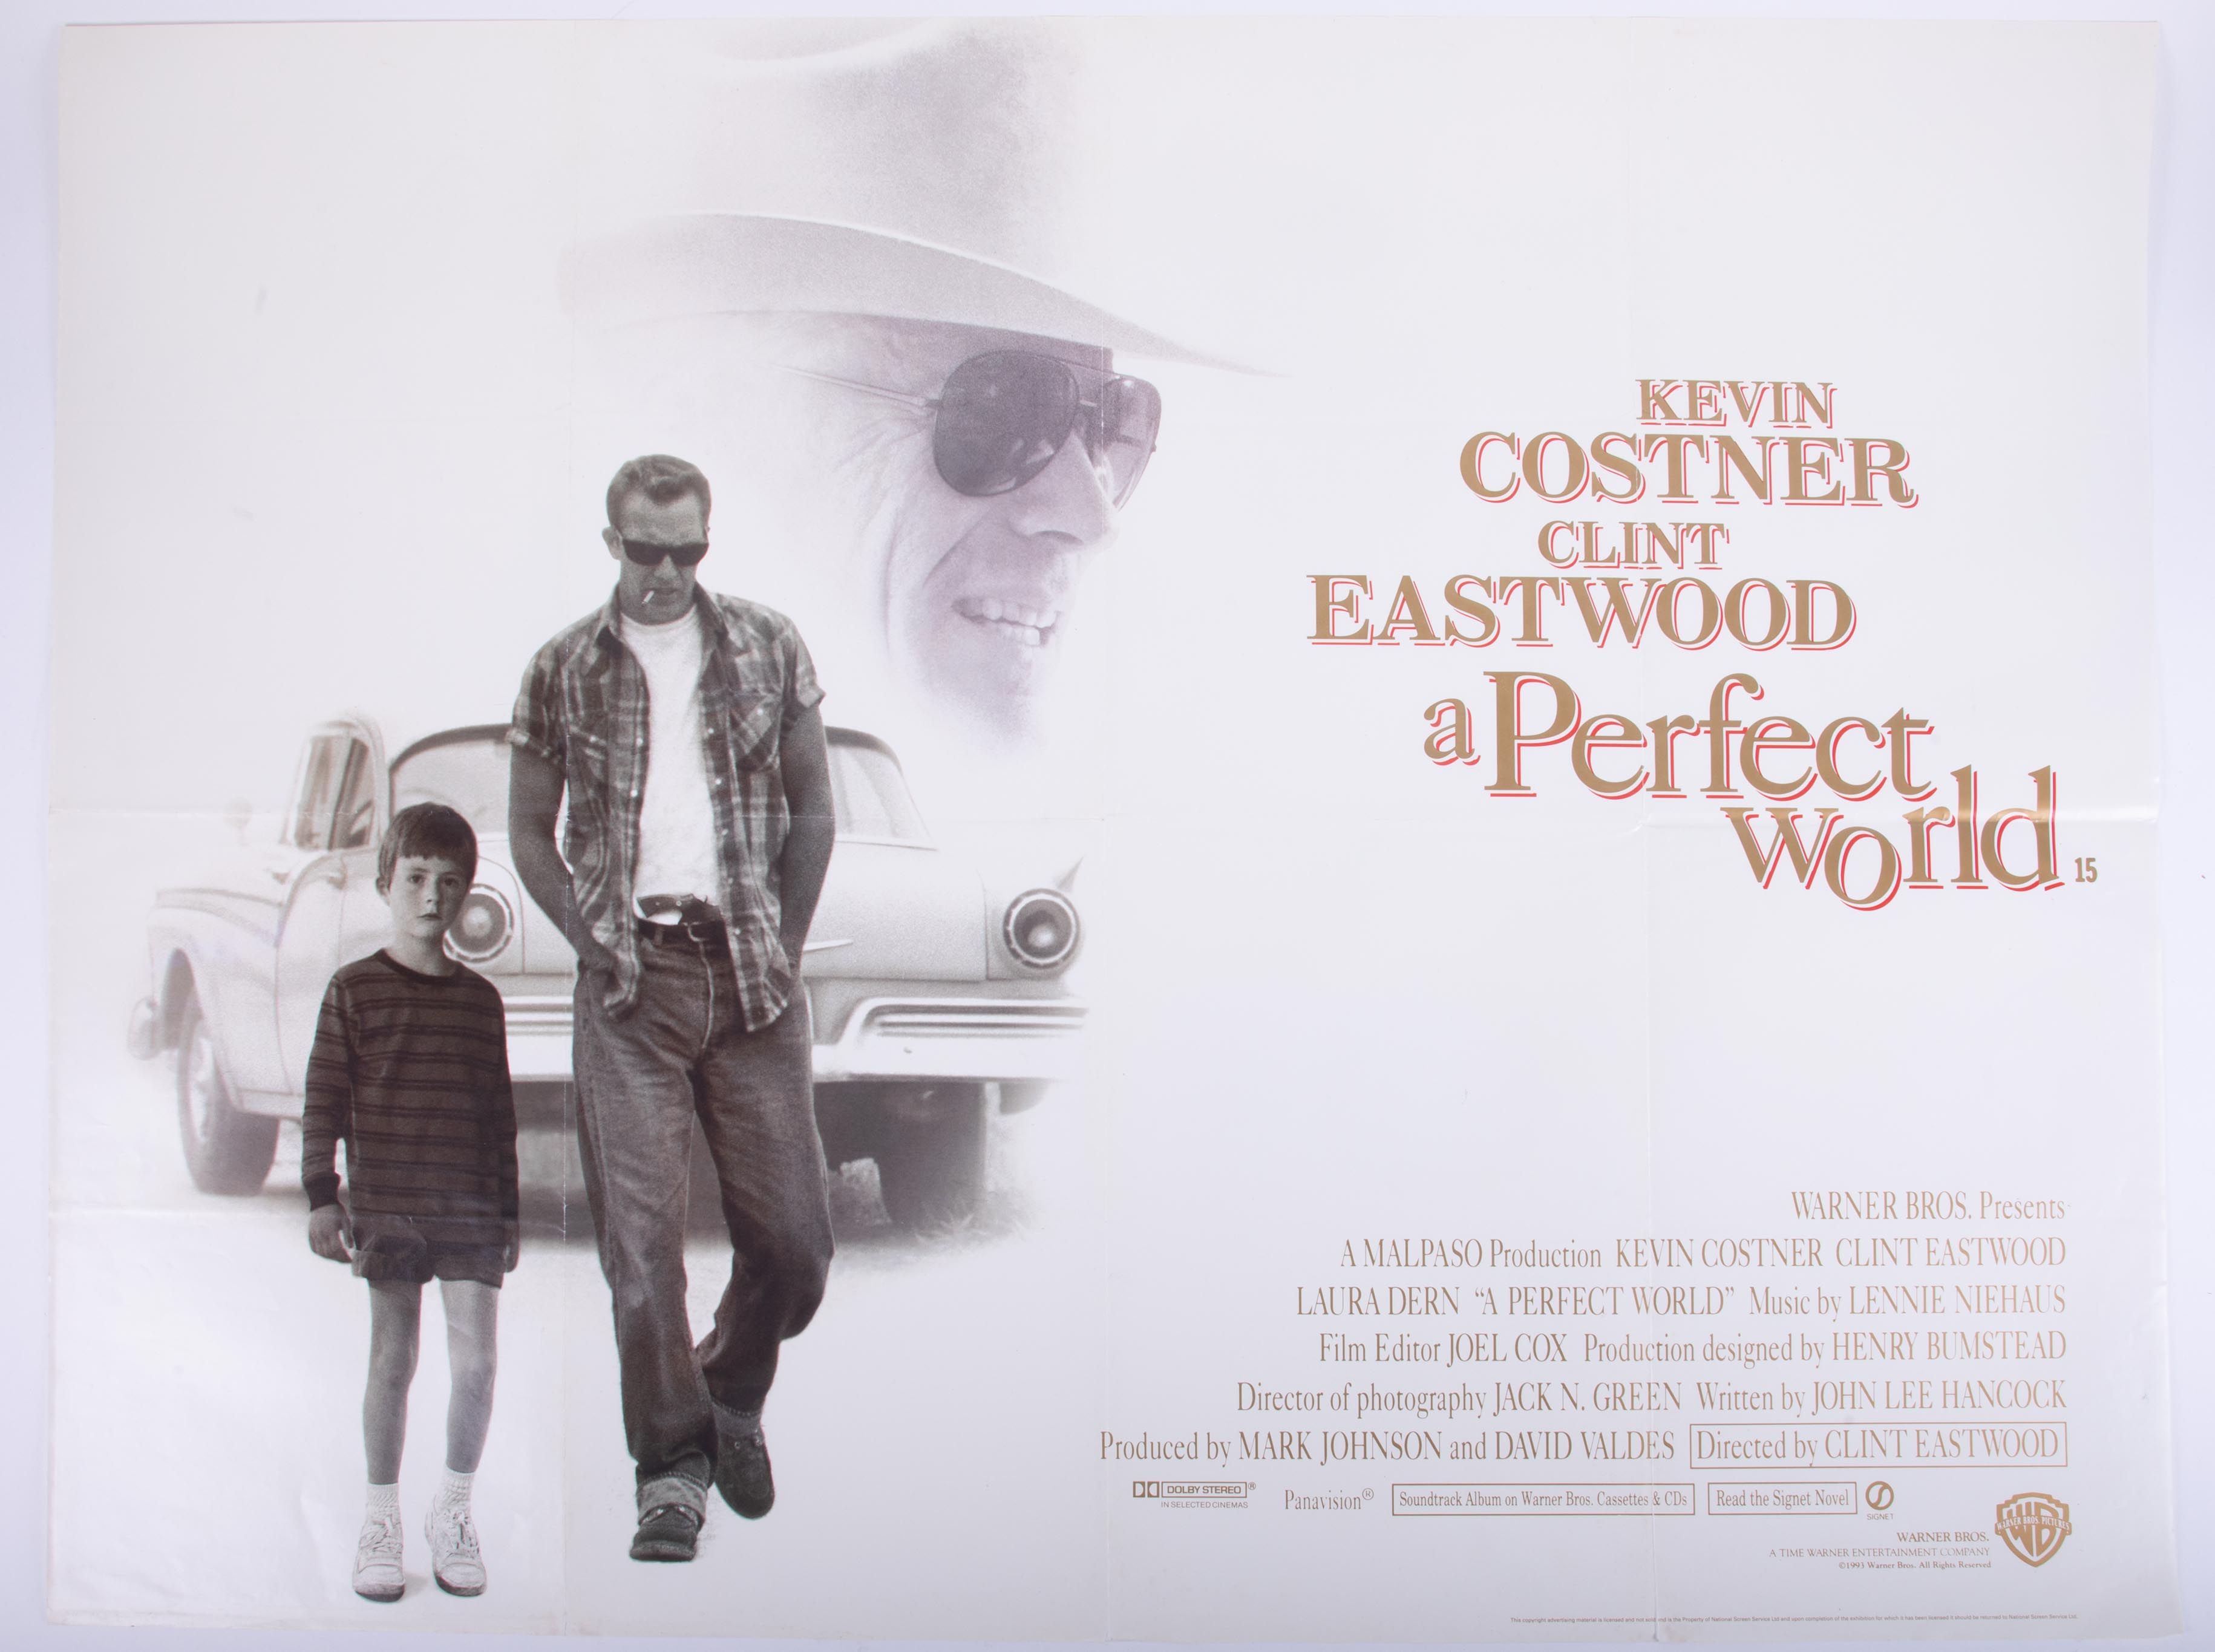 Cinema Poster for the film 'A Perfect World' year 1993 featuring Kevin Costner/Clint Eastwood.